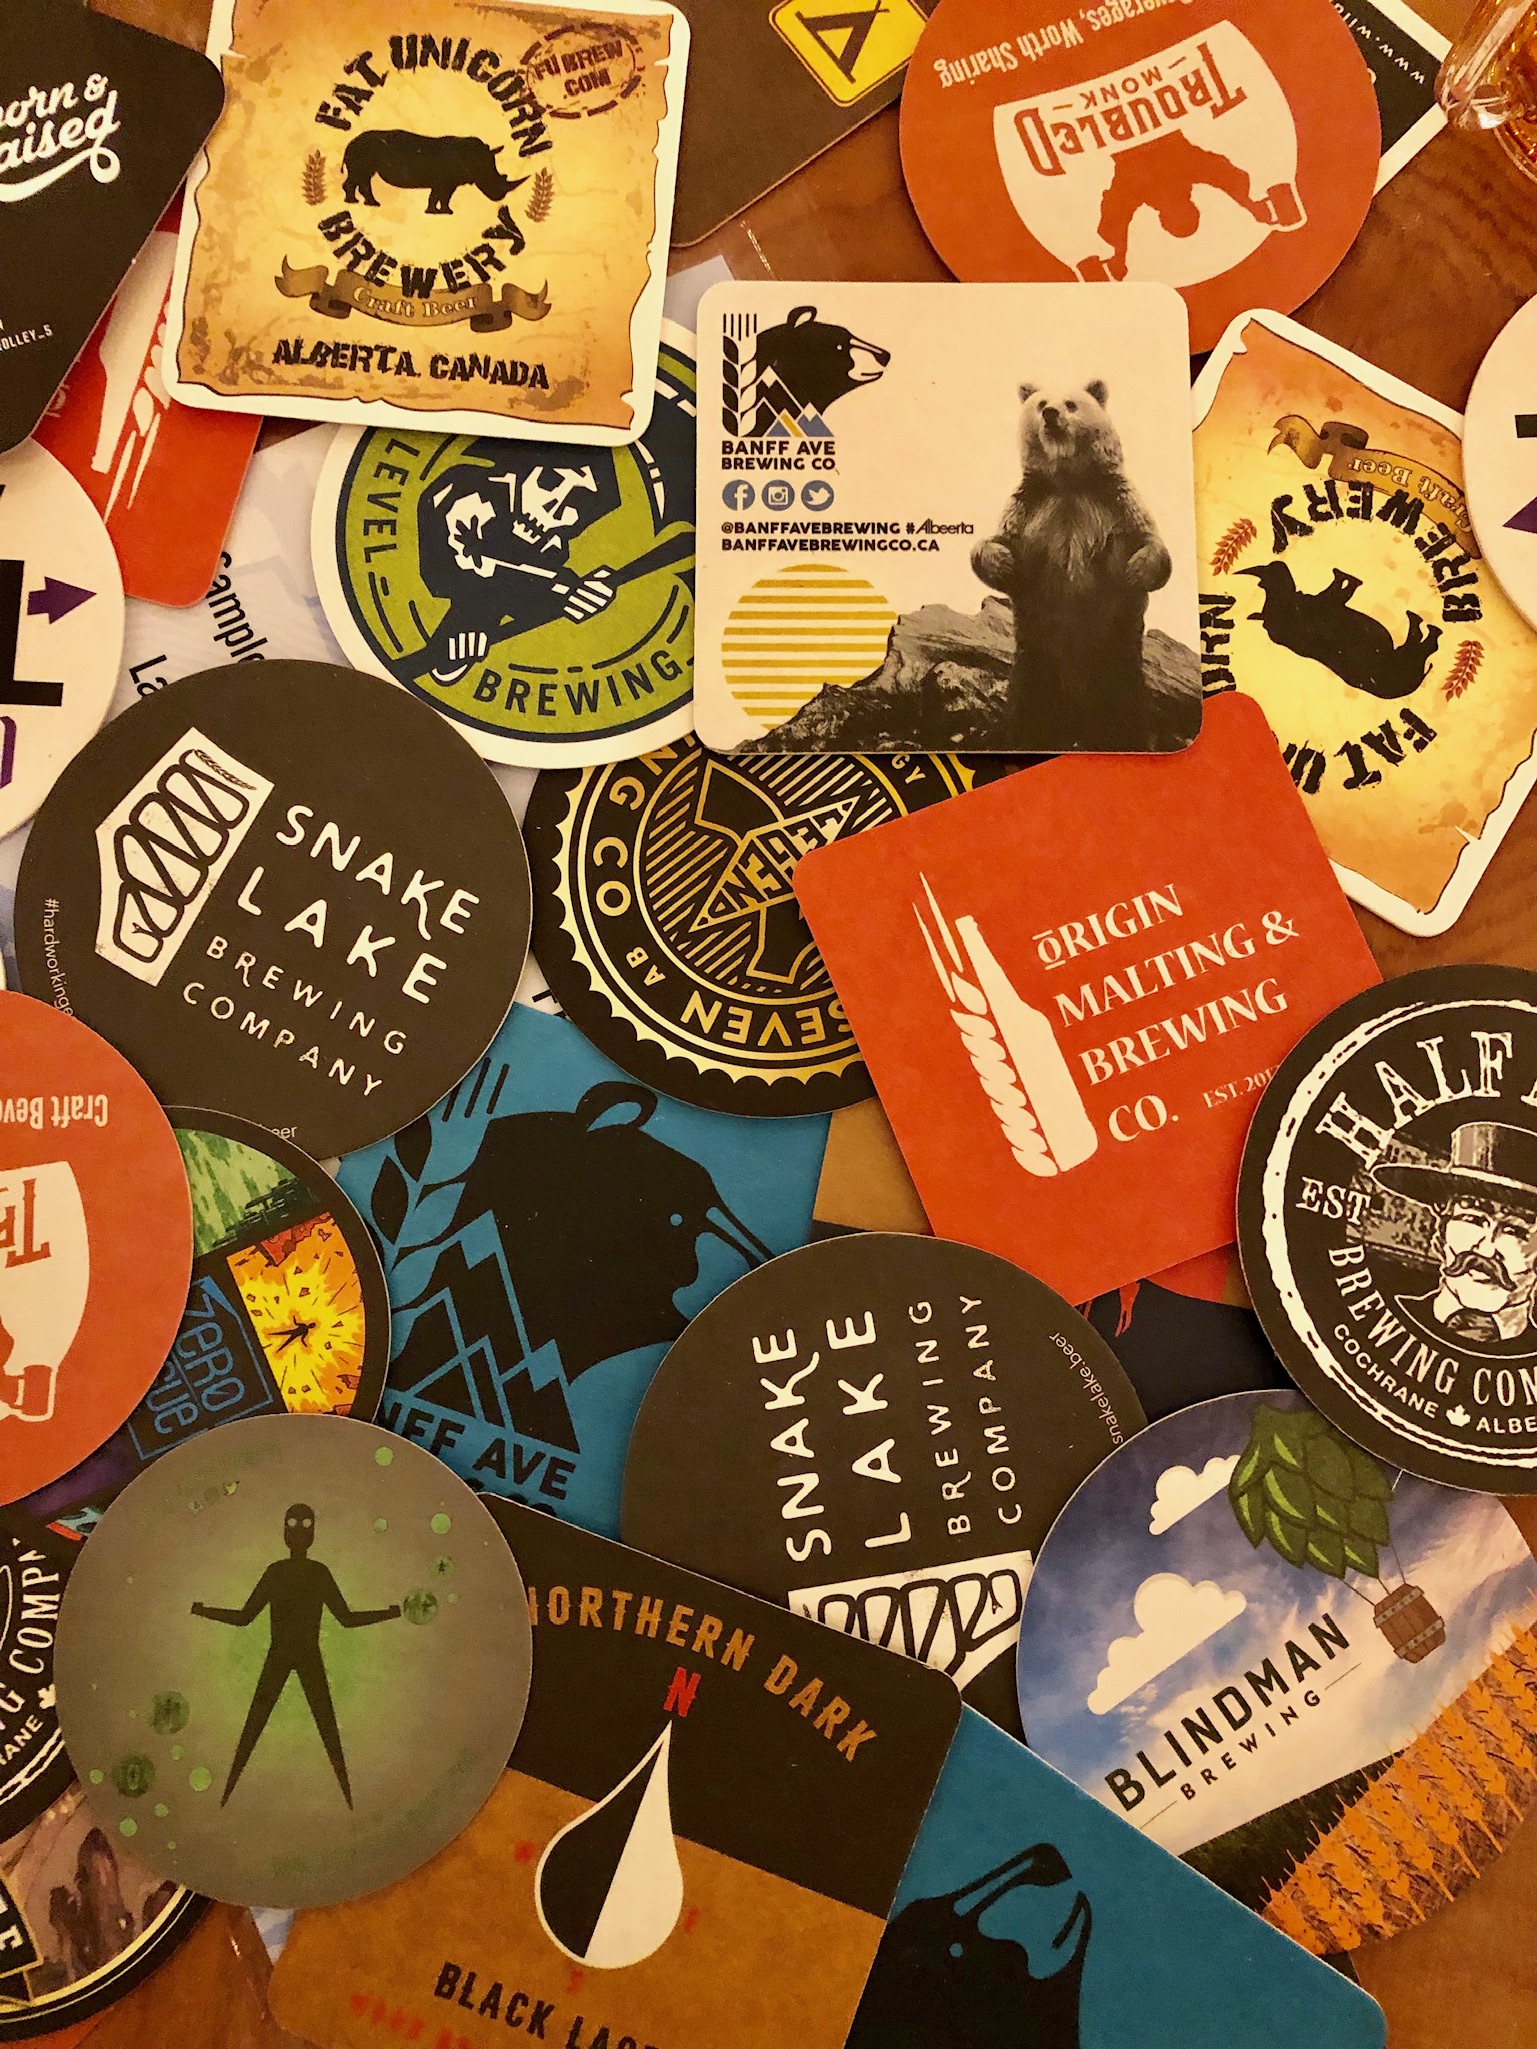 Assorted coasters at the Banff Craft Beer Festival.